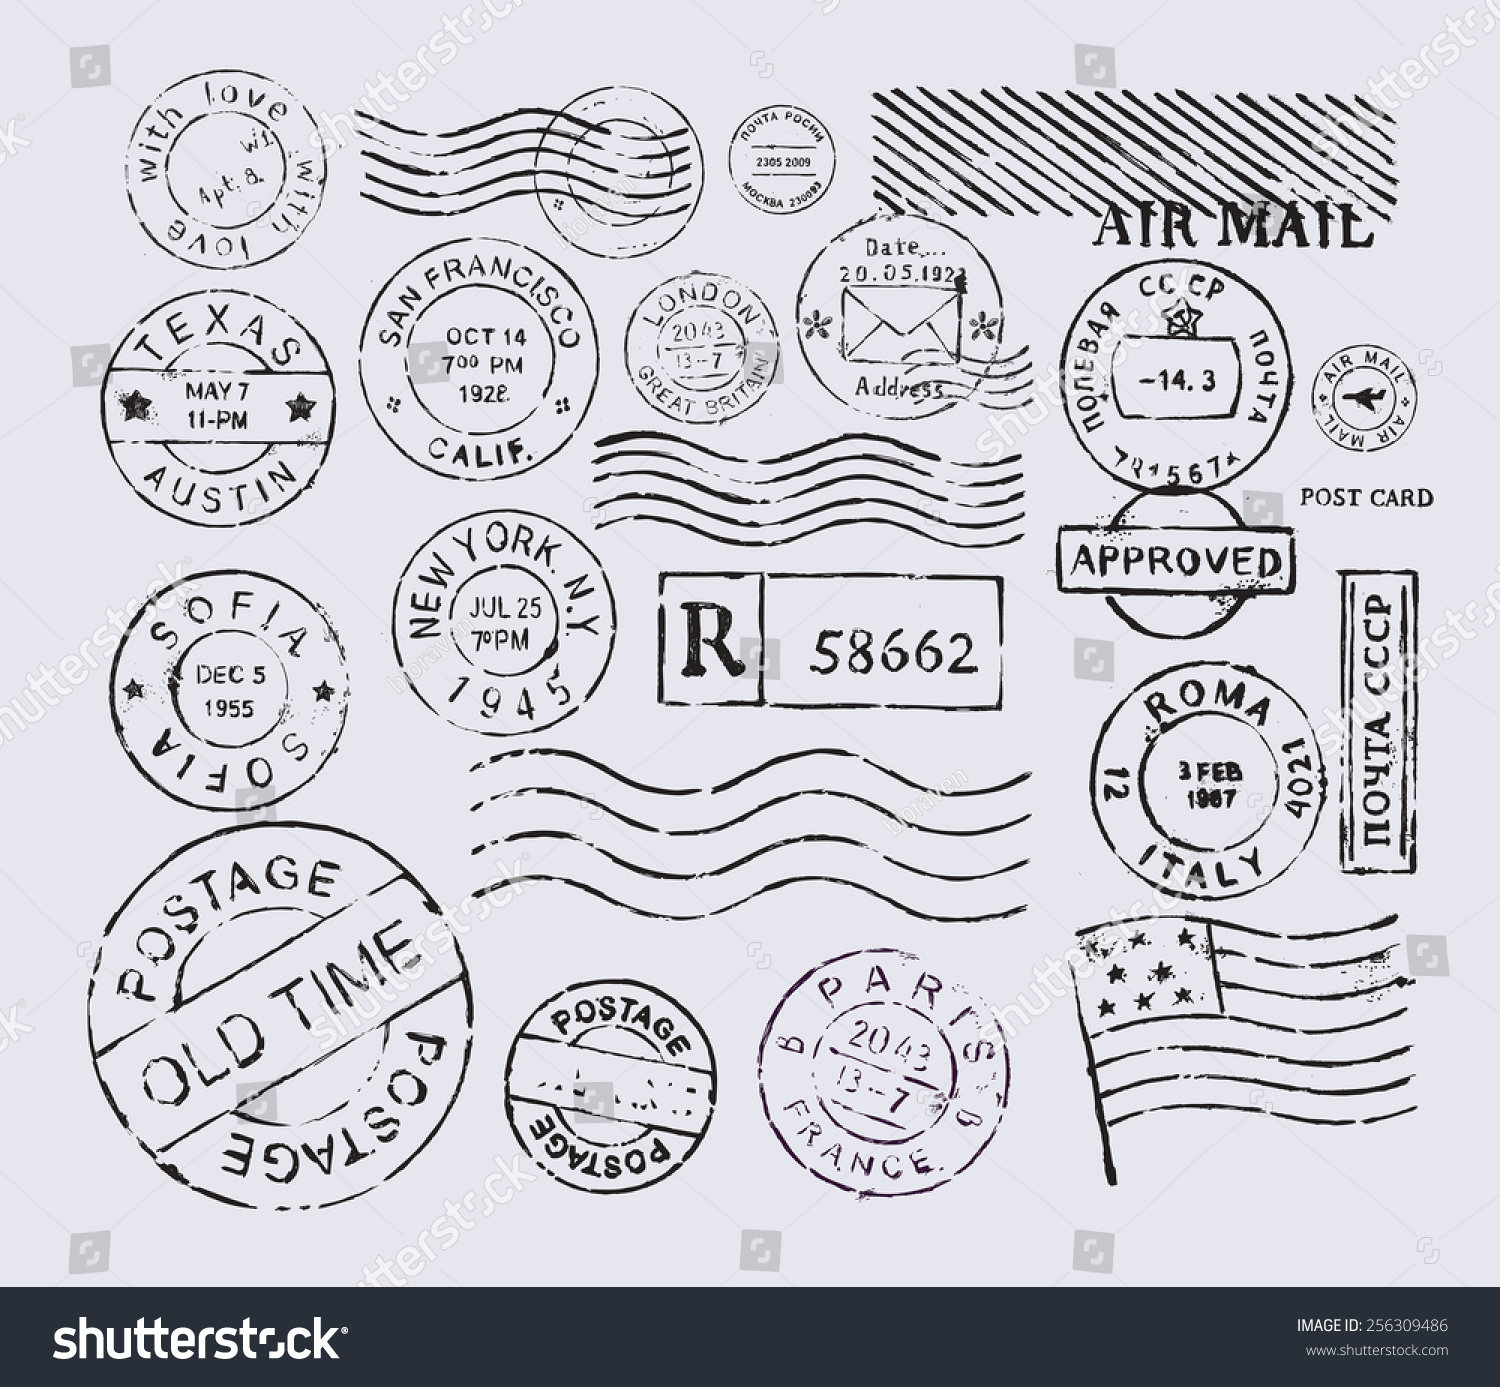 Vector Retro Postage Stamp On Gray Background - 256309486 : Shutterstock